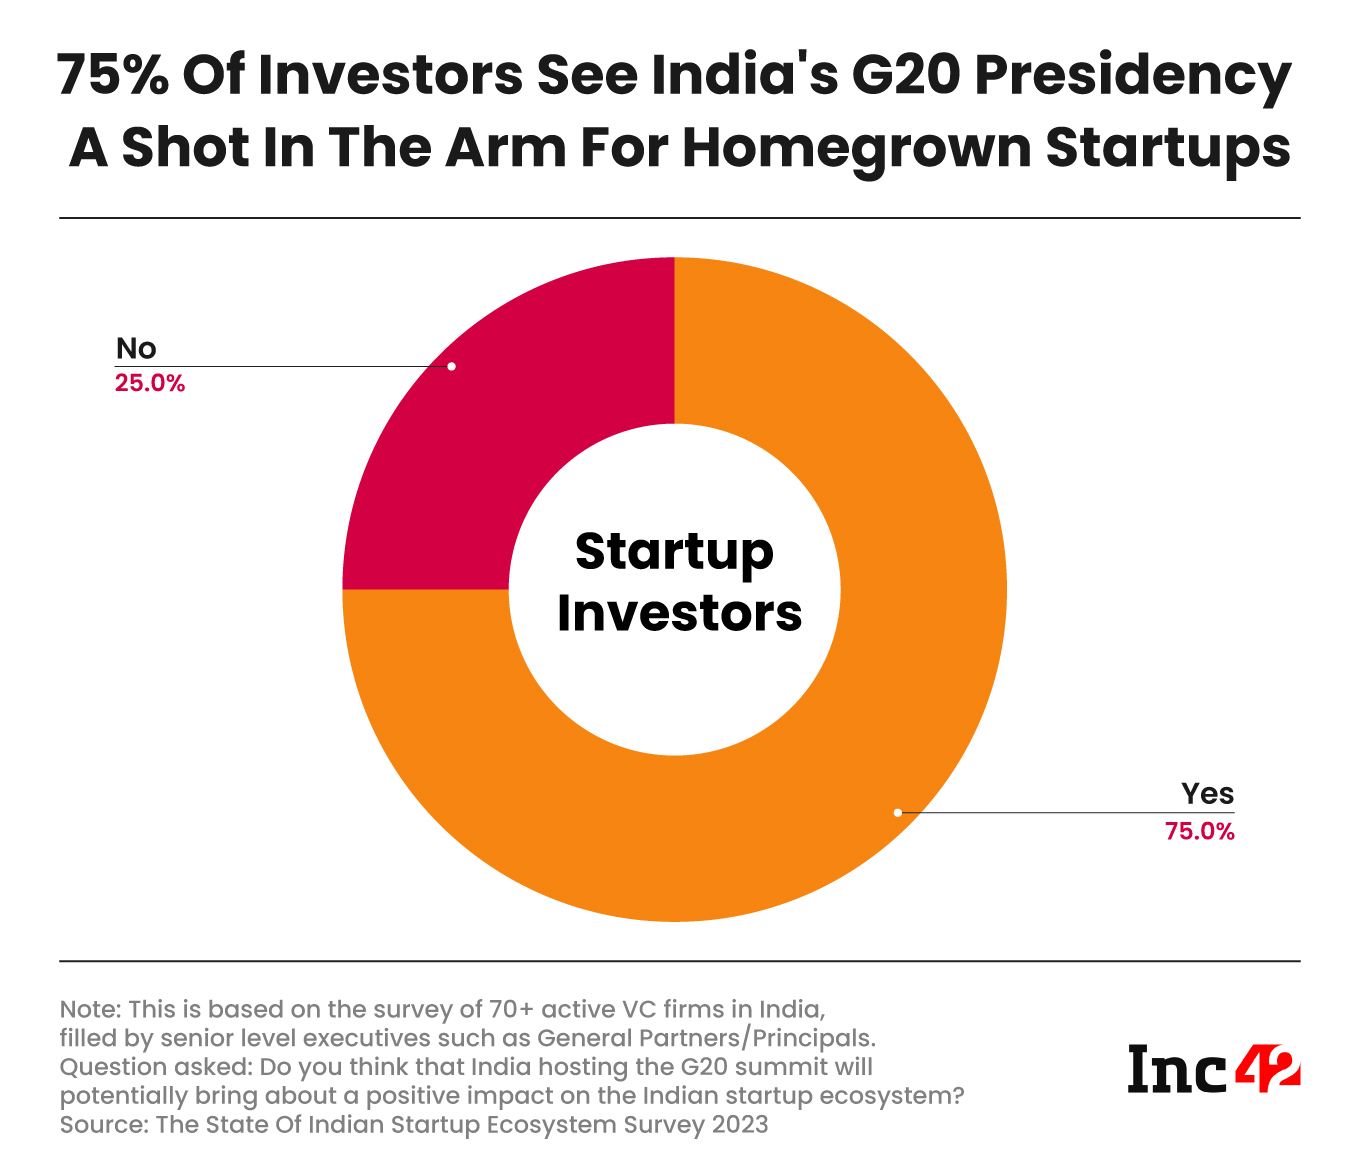 Investors Reckon G20 Presidency A Shot In The Arm For Indian Startups